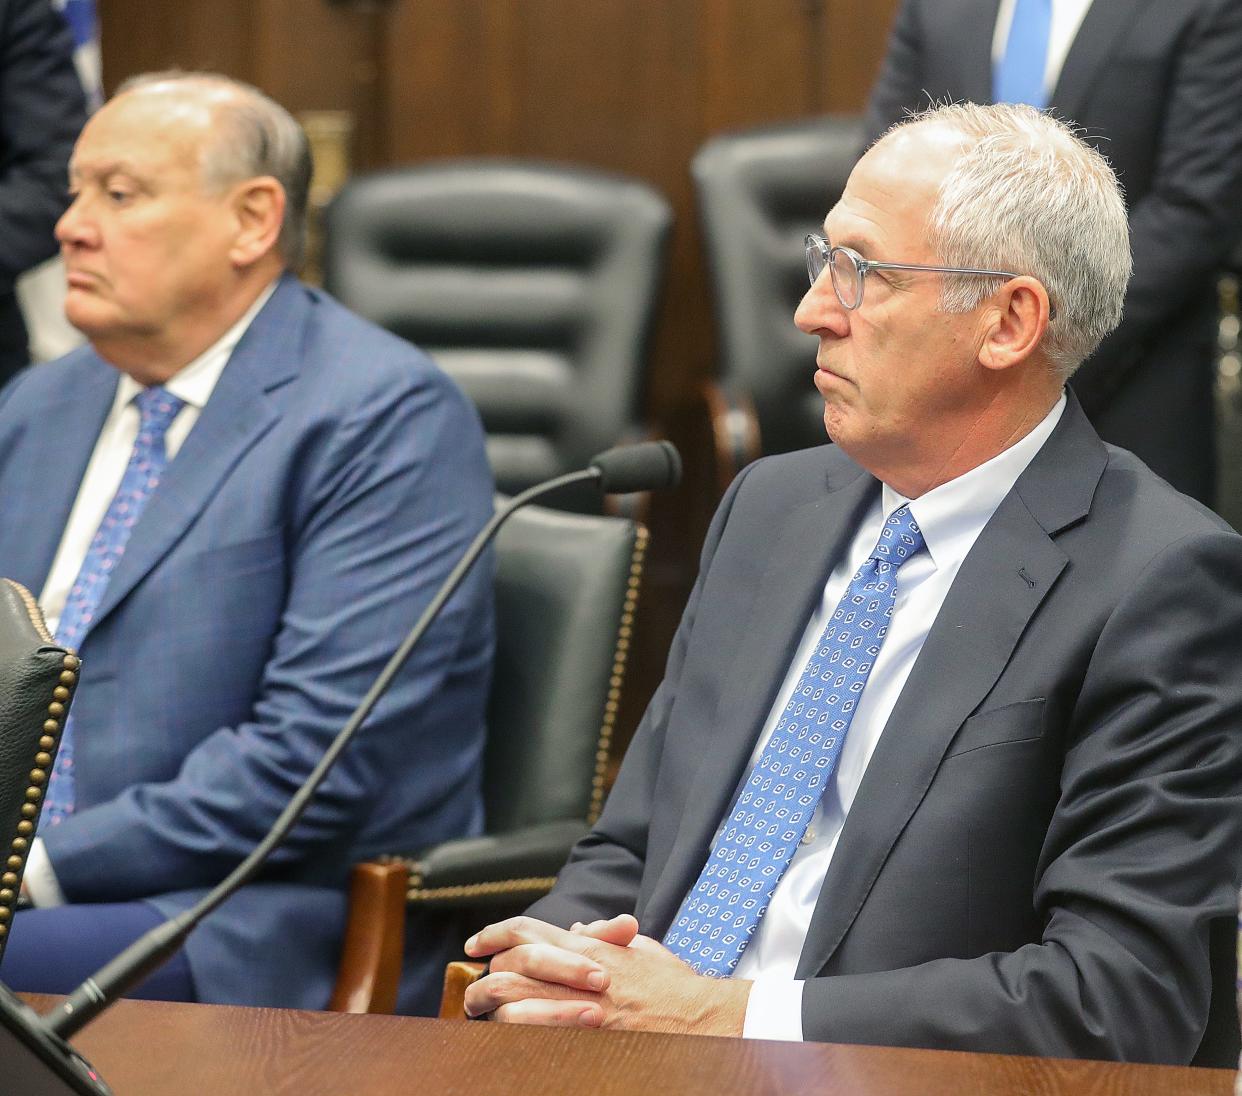 Former FirstEnergy CEO Charles "Chuck" Jones, left, and former FirstEnergy Senior VP of External Affairs Michael Dowling are accused of participating in a pay-to-play scheme. Dowling wants to call Gov. Mike DeWine and Lt. Gov. Jon Husted as witnesses.